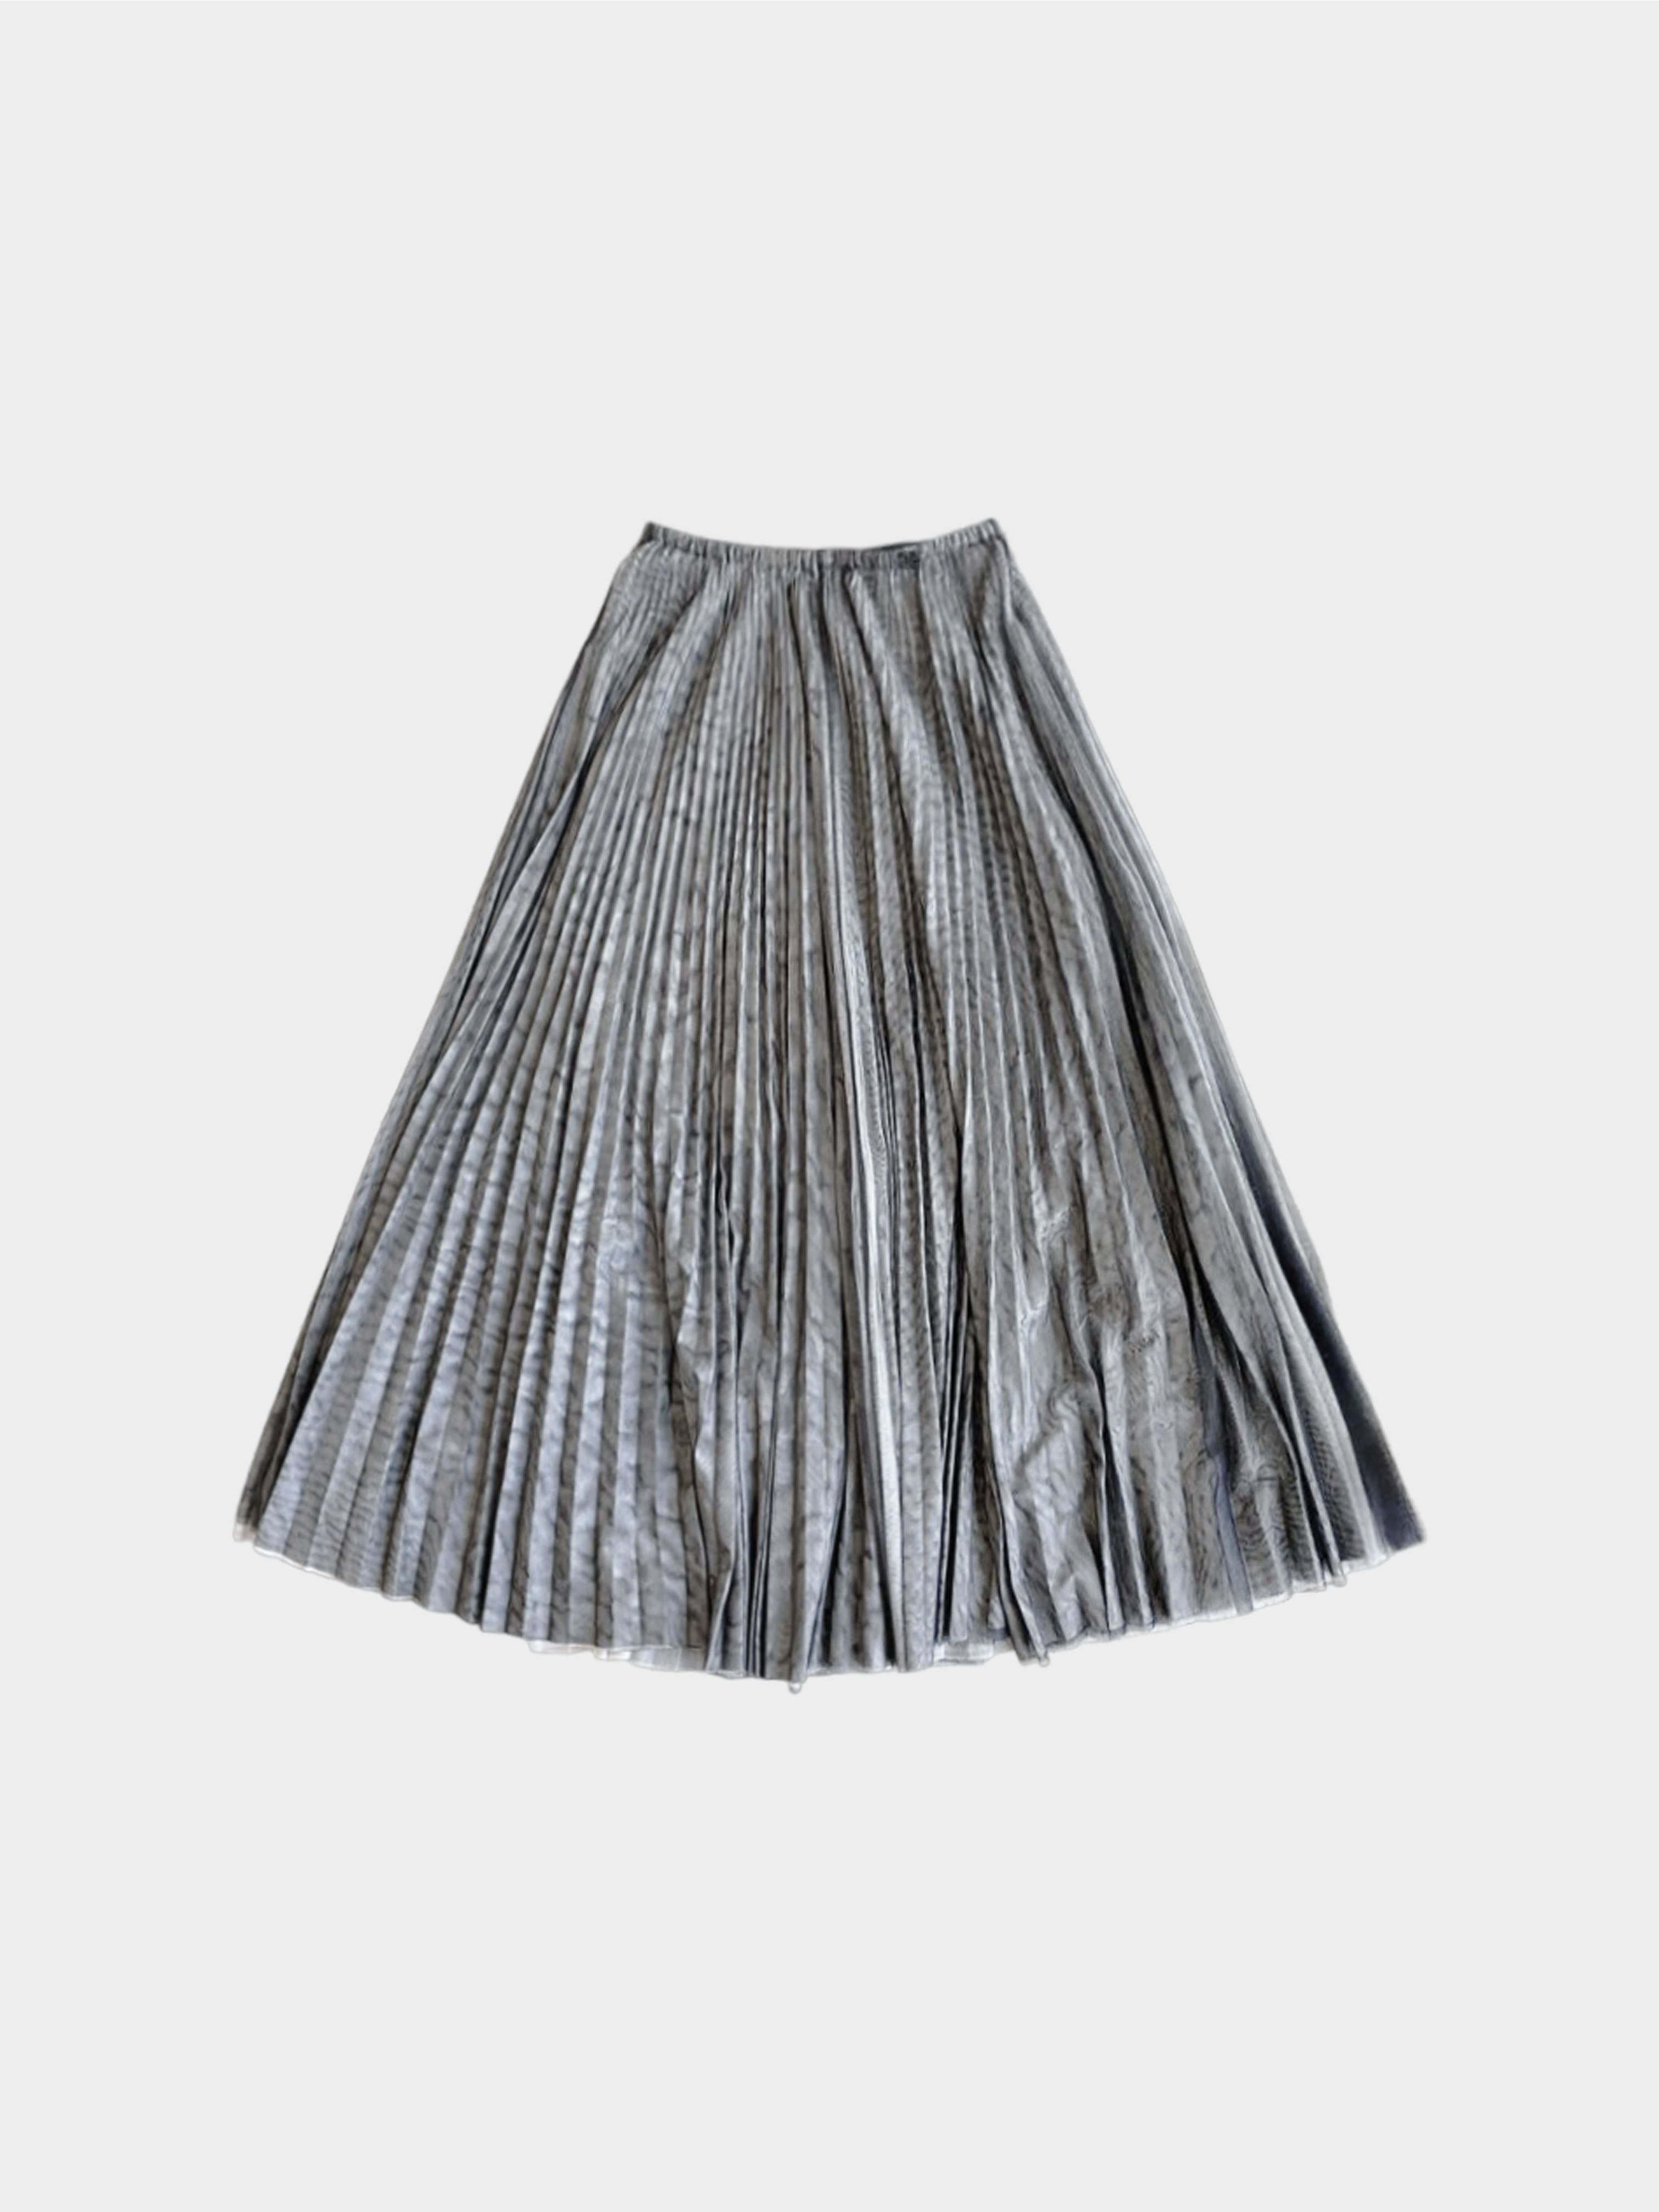 Chanel Cruise 2002 Grey Pleated Long Skirt